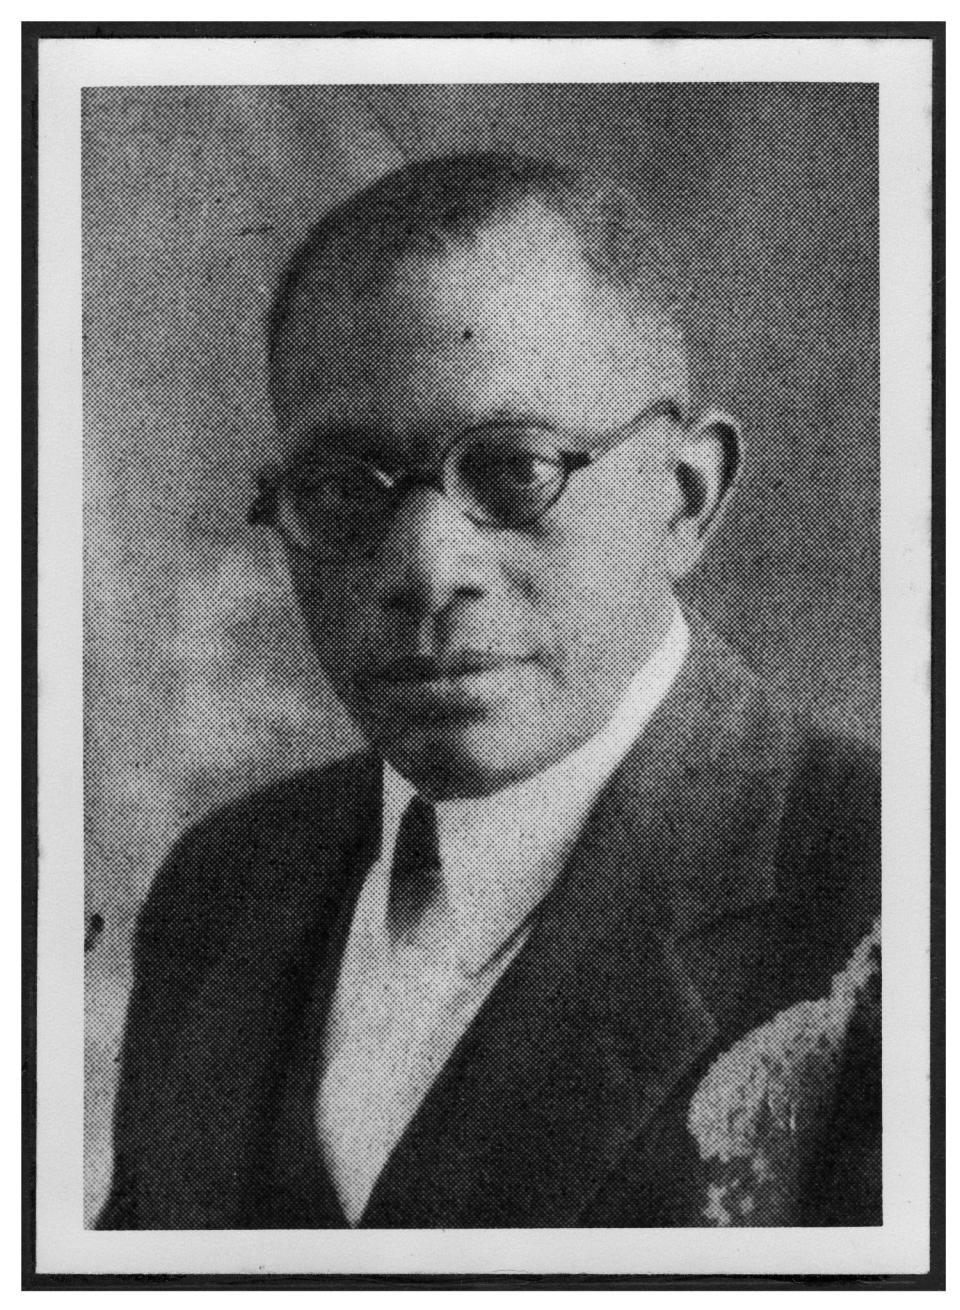 The Rev. Jerome Christopher Lott, who served as pastor of Ebenezer Baptist Church from 1928 to 1949, was a great evangelist and outstanding leader in the state and national Baptist conventions.